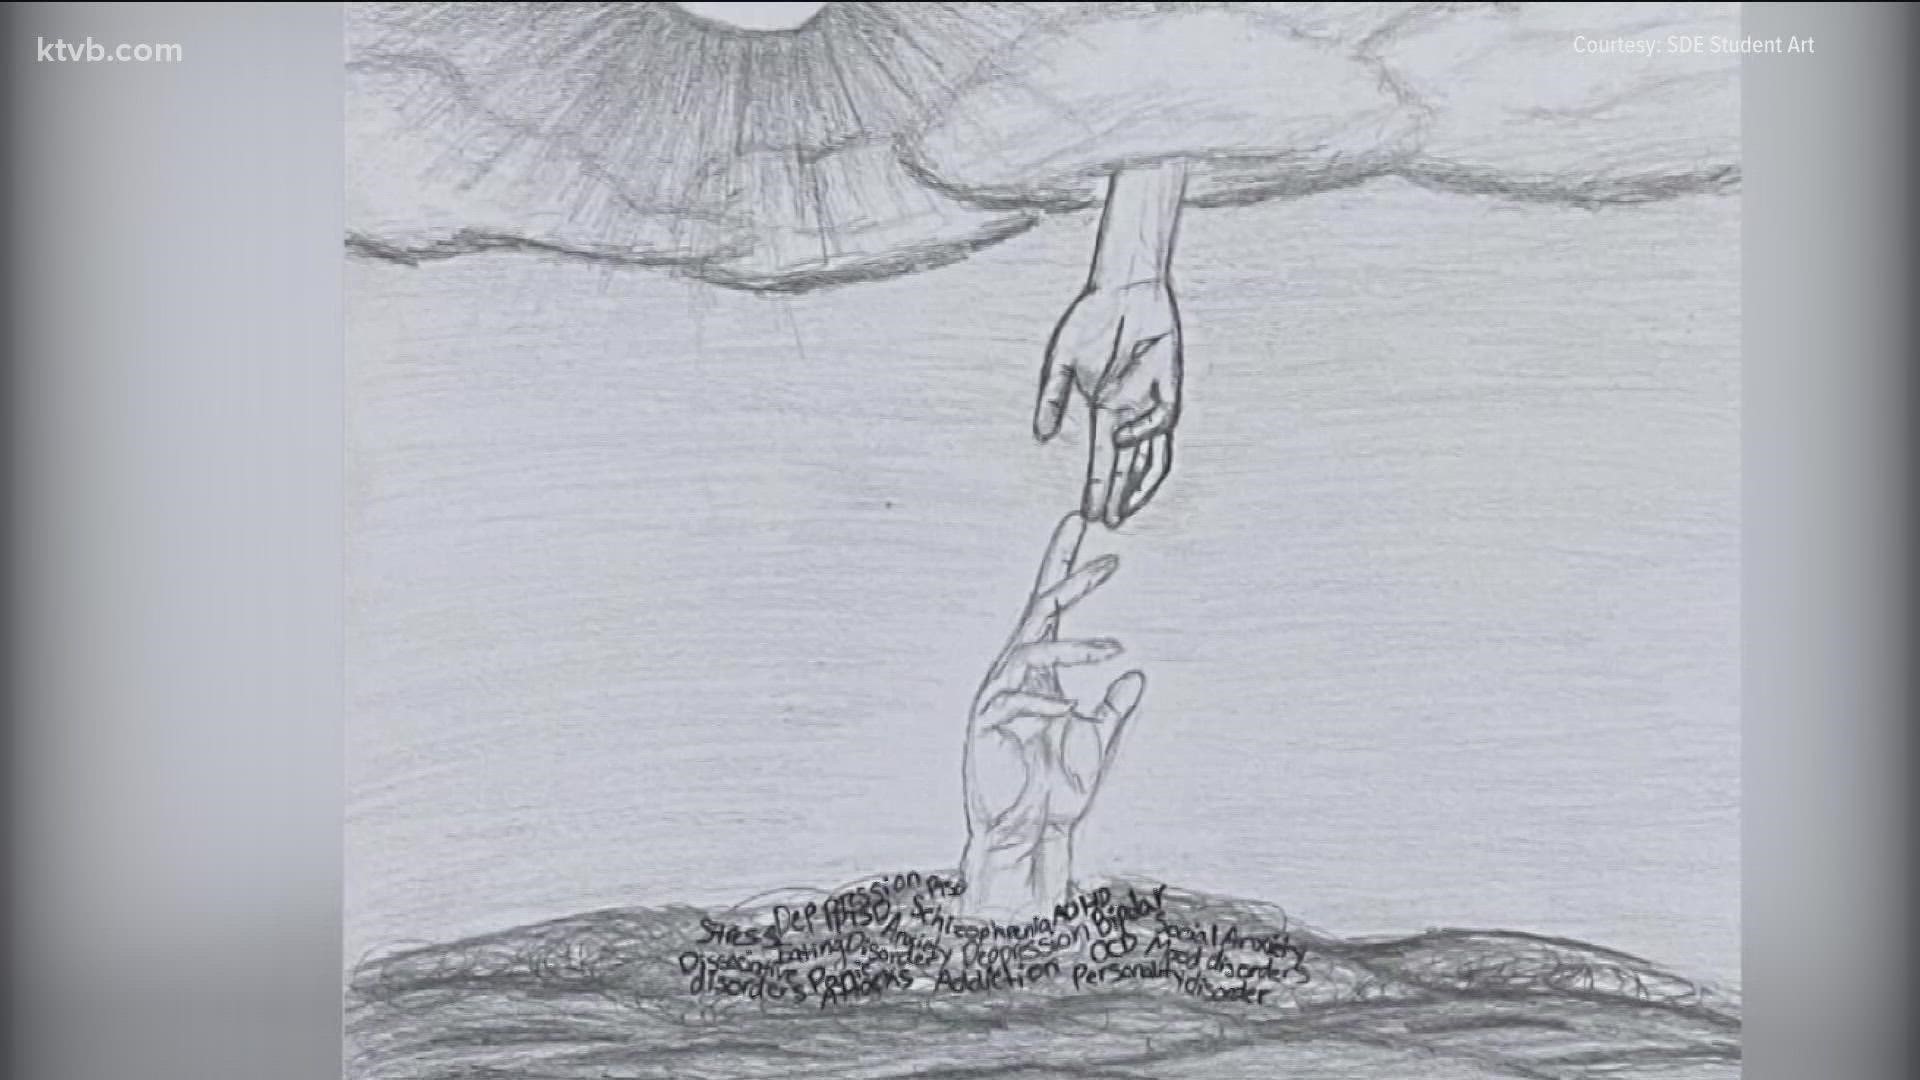 Jaanai Guajardo won the State Department of Education's student contest with a pencil sketch of a hand reaching from the ground toward a stretched hand above.